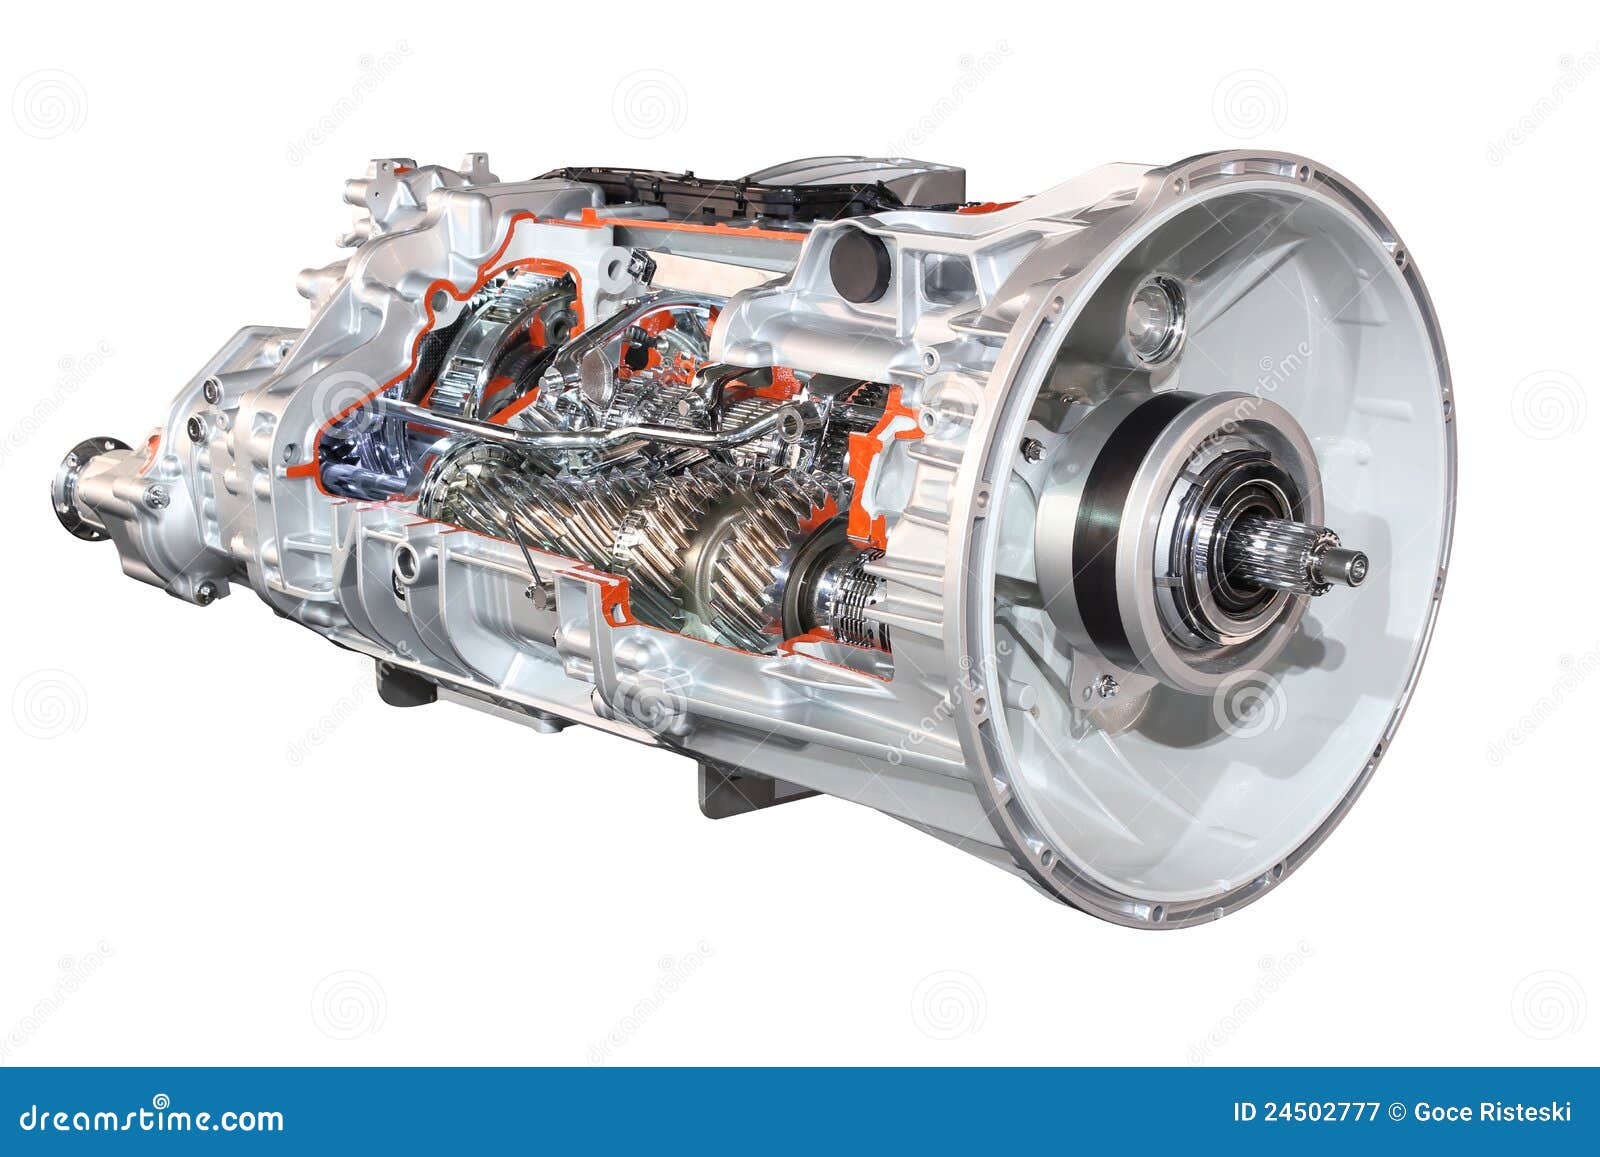 heavy truck automatic transmission